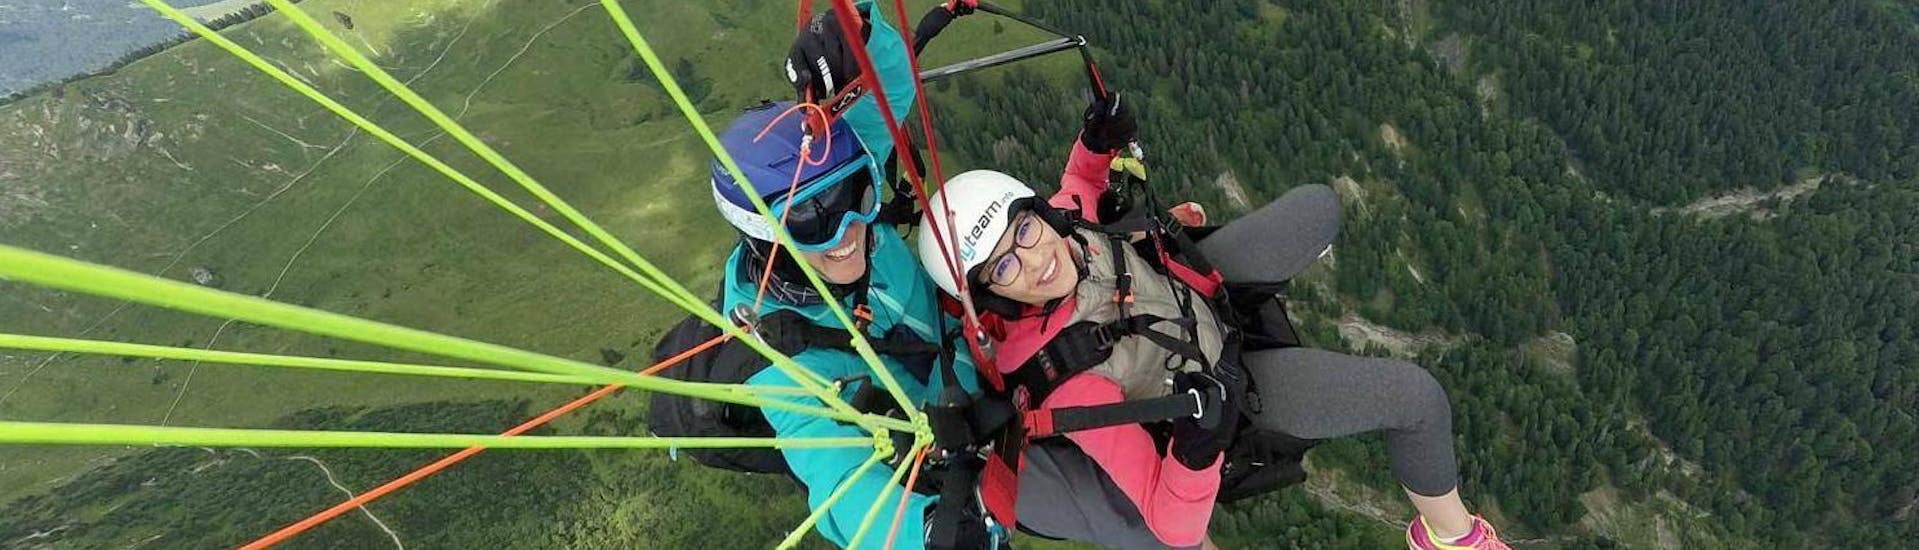 A tandem pilot from FlyTeam and his passenger are flying over the green mountain landscape during the Tandem Paragliding "Full Day" in Allgäu and Tyrol.